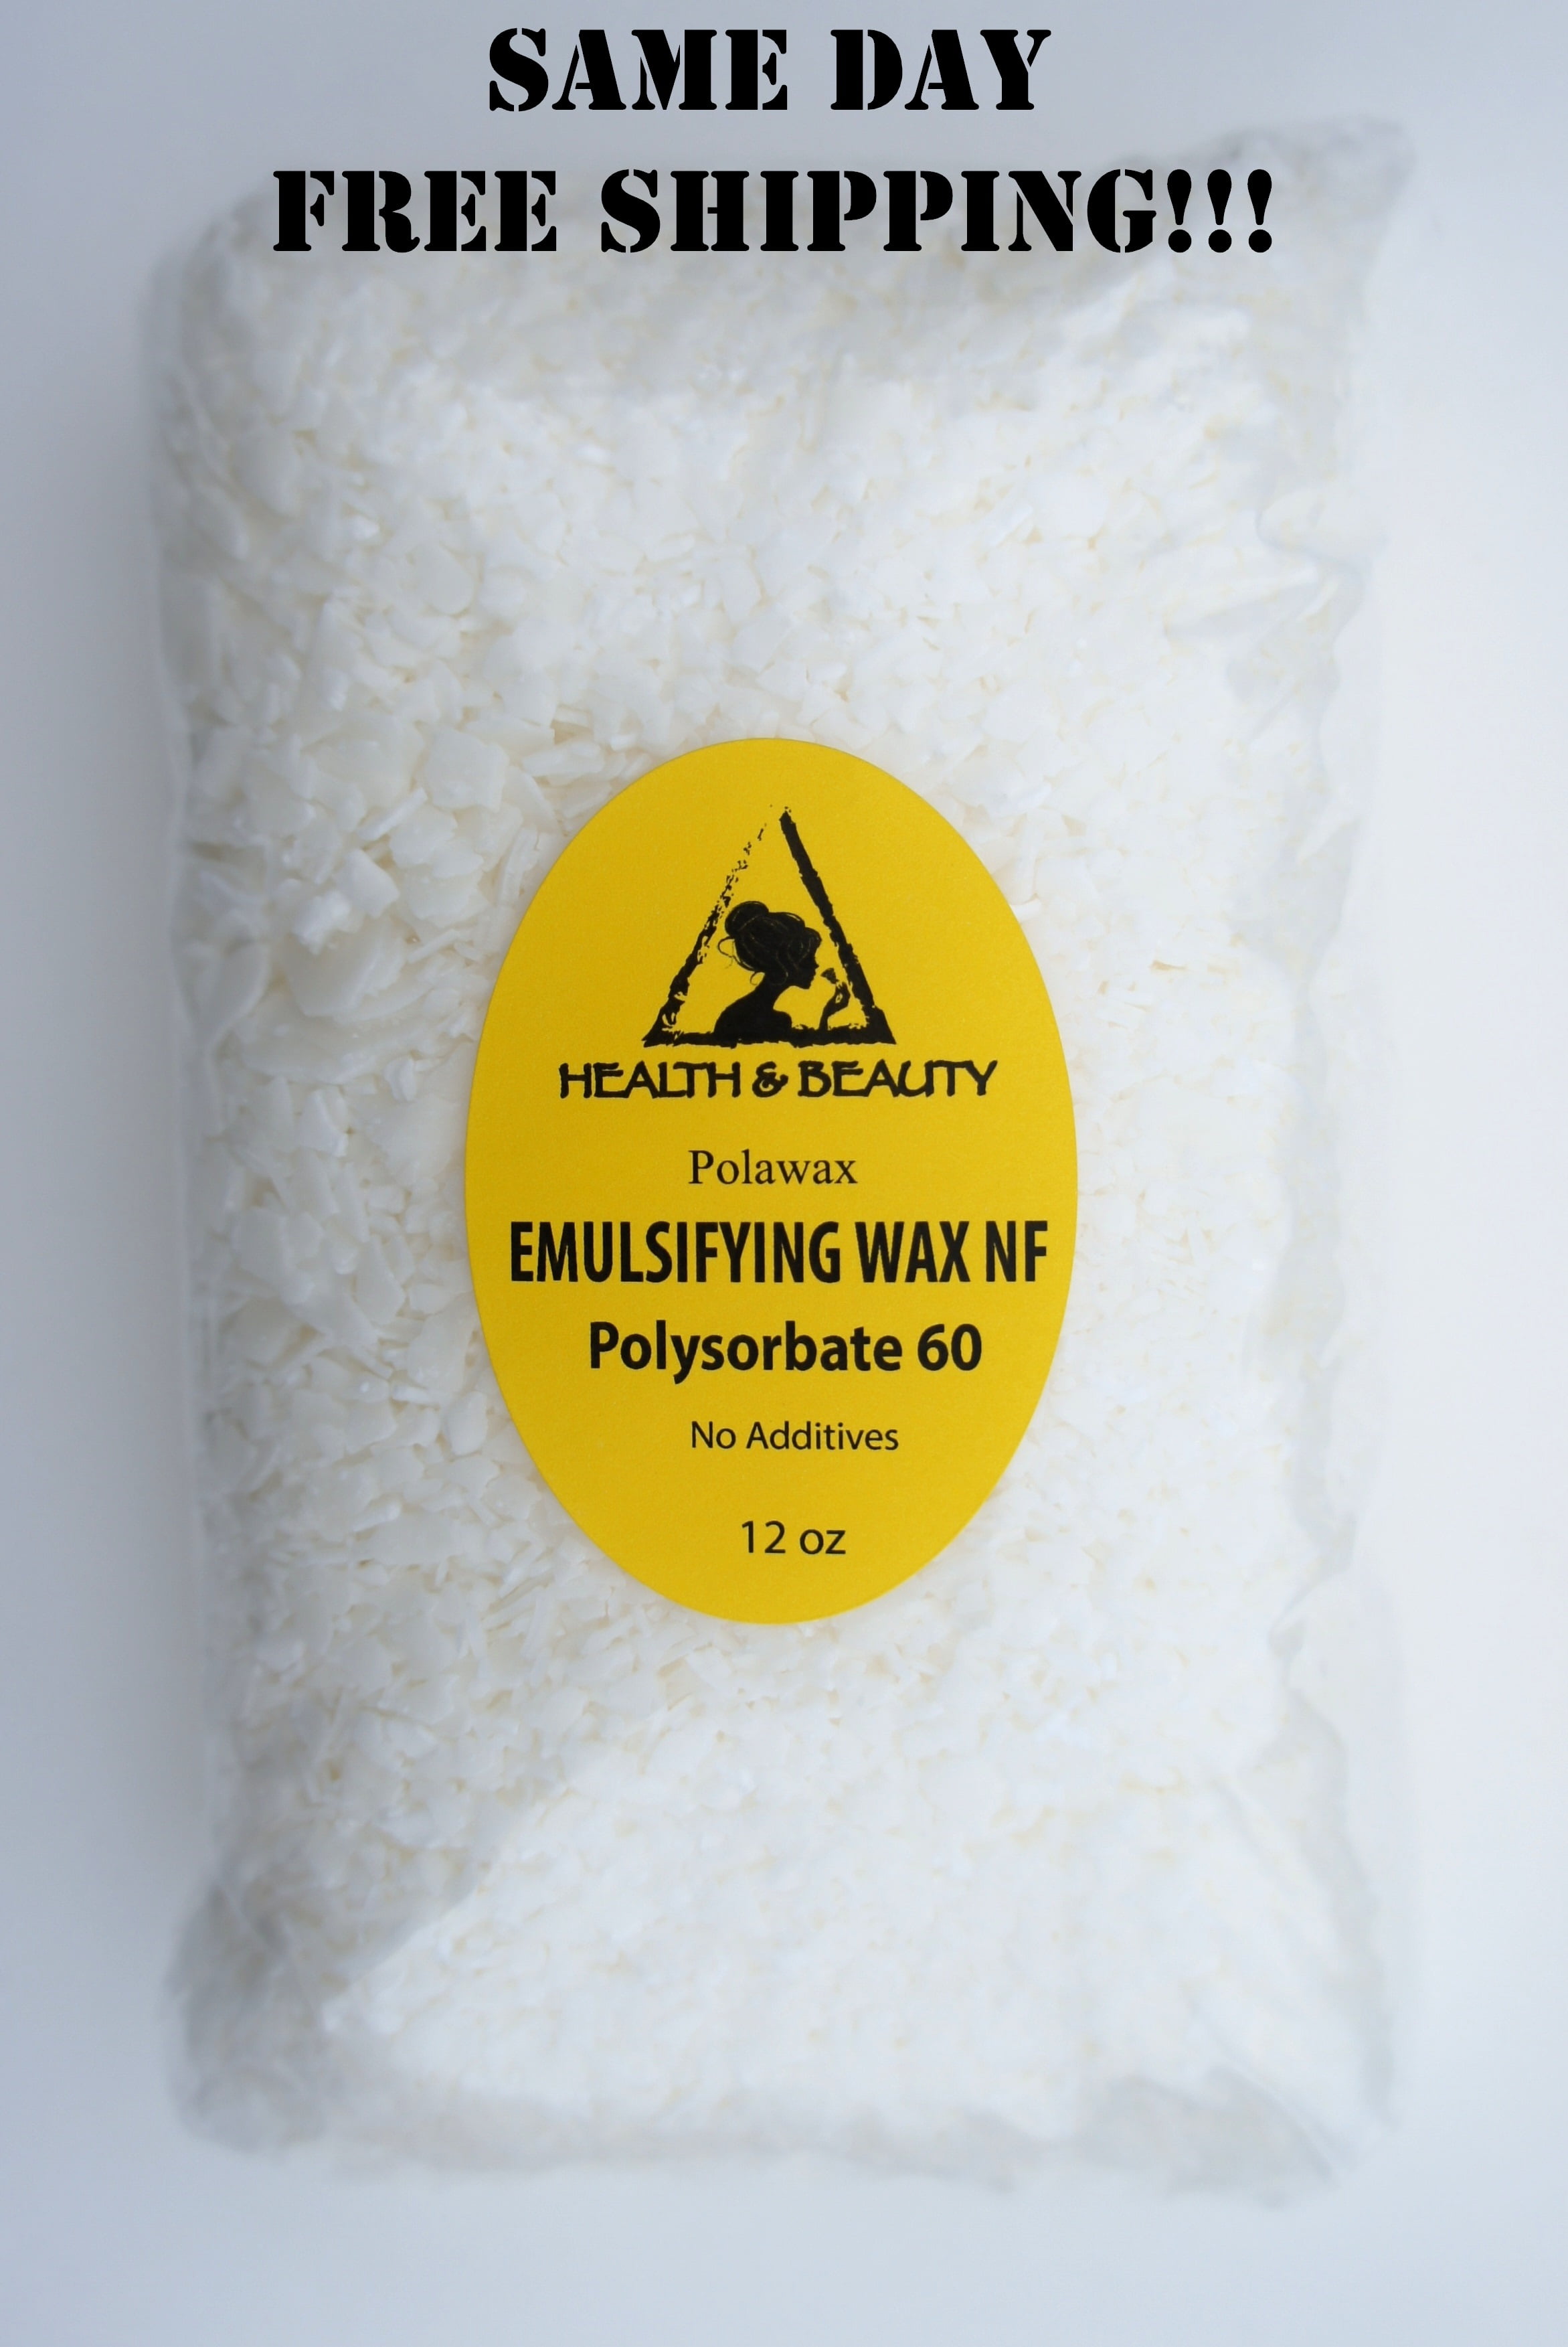 Emulsifying wax: what is it and is it natural? - The Makeup Dummy